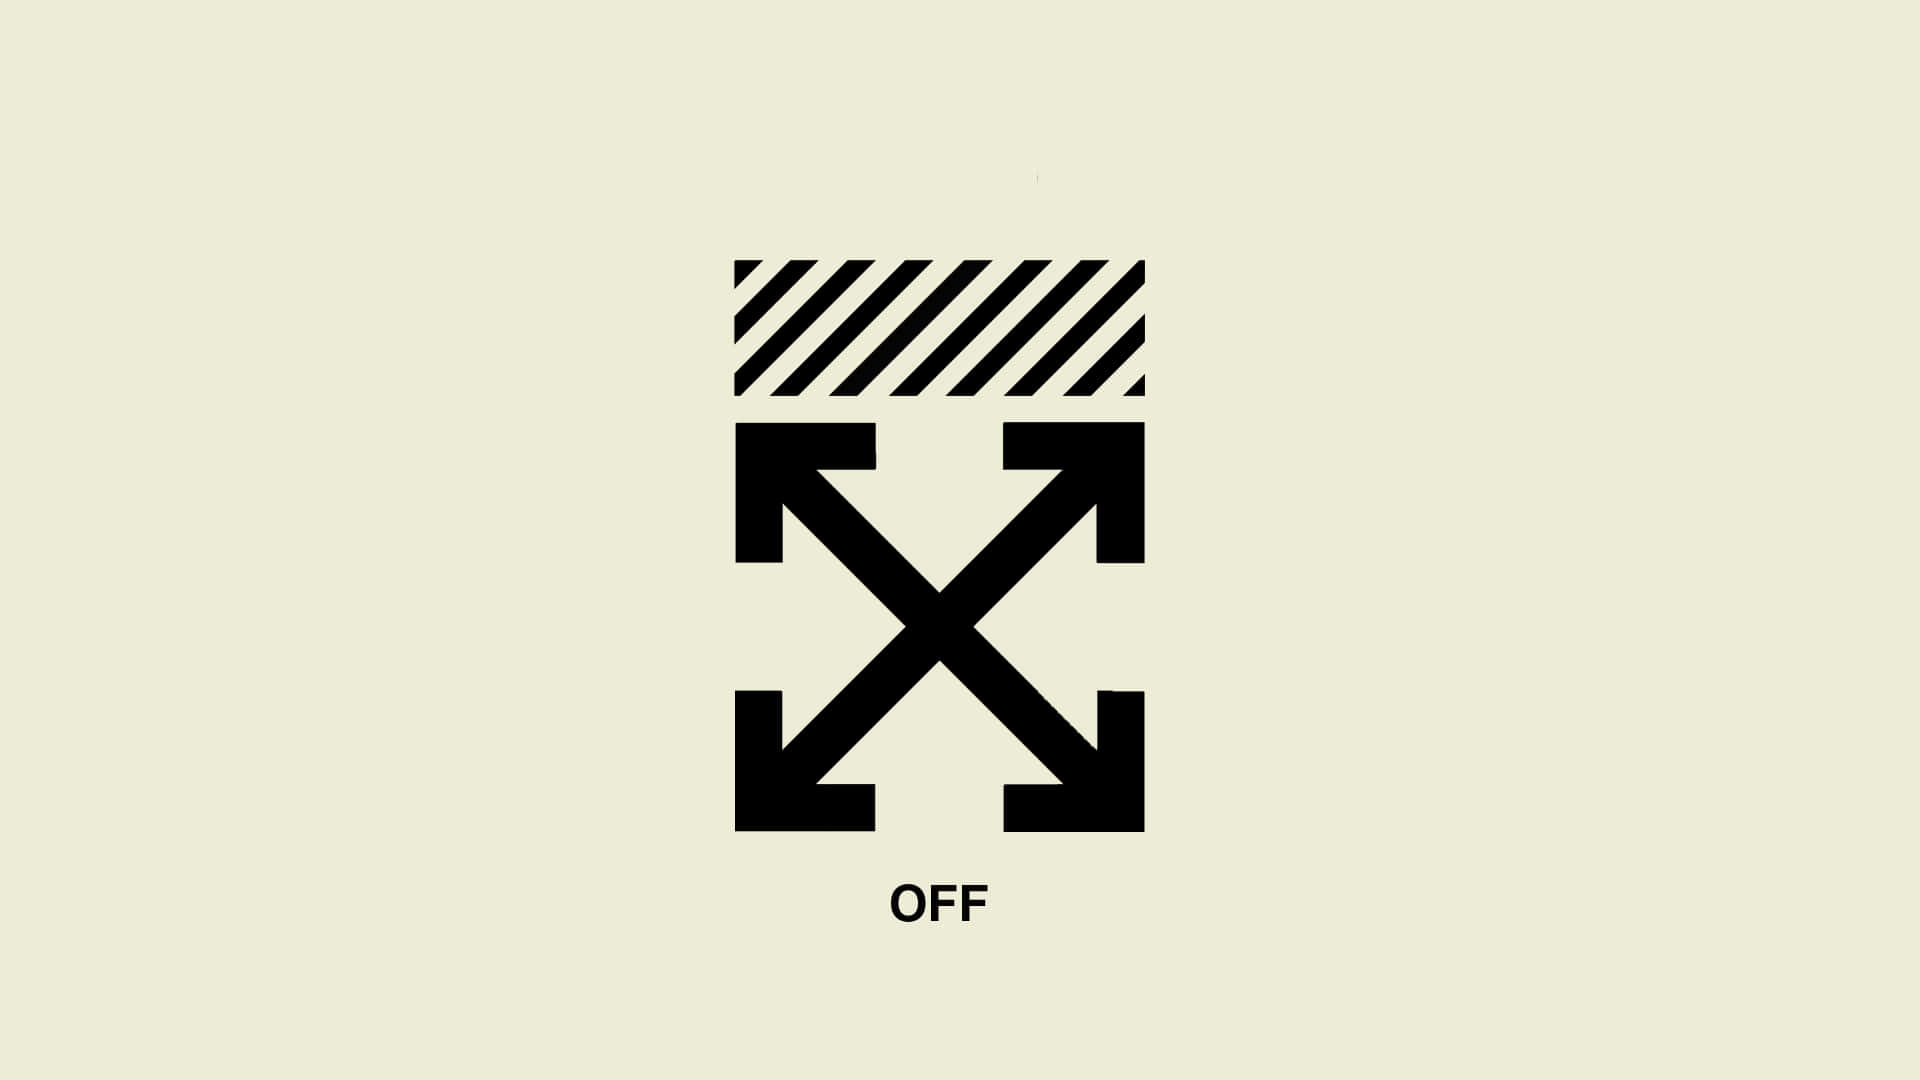 Off White - A Directional Arrow Wallpaper